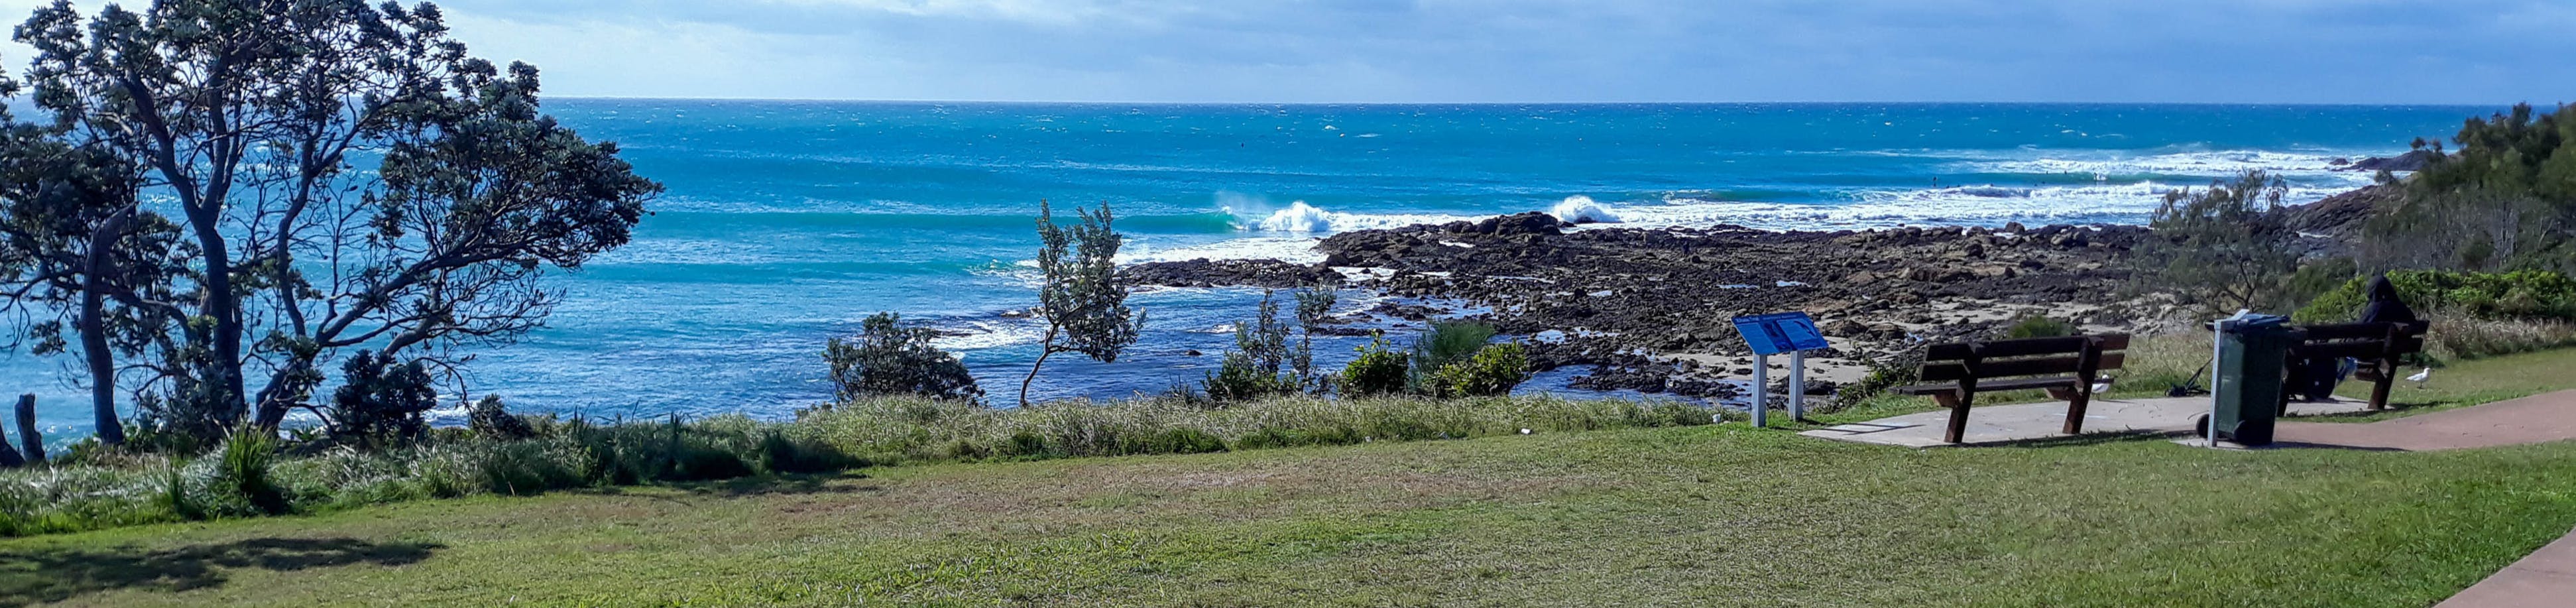 Council is inviting community comment on a proposed design for the $1.1 million Woolgoolga Whale Trail Project and possible future enhancements that could be constructed with additional funding.